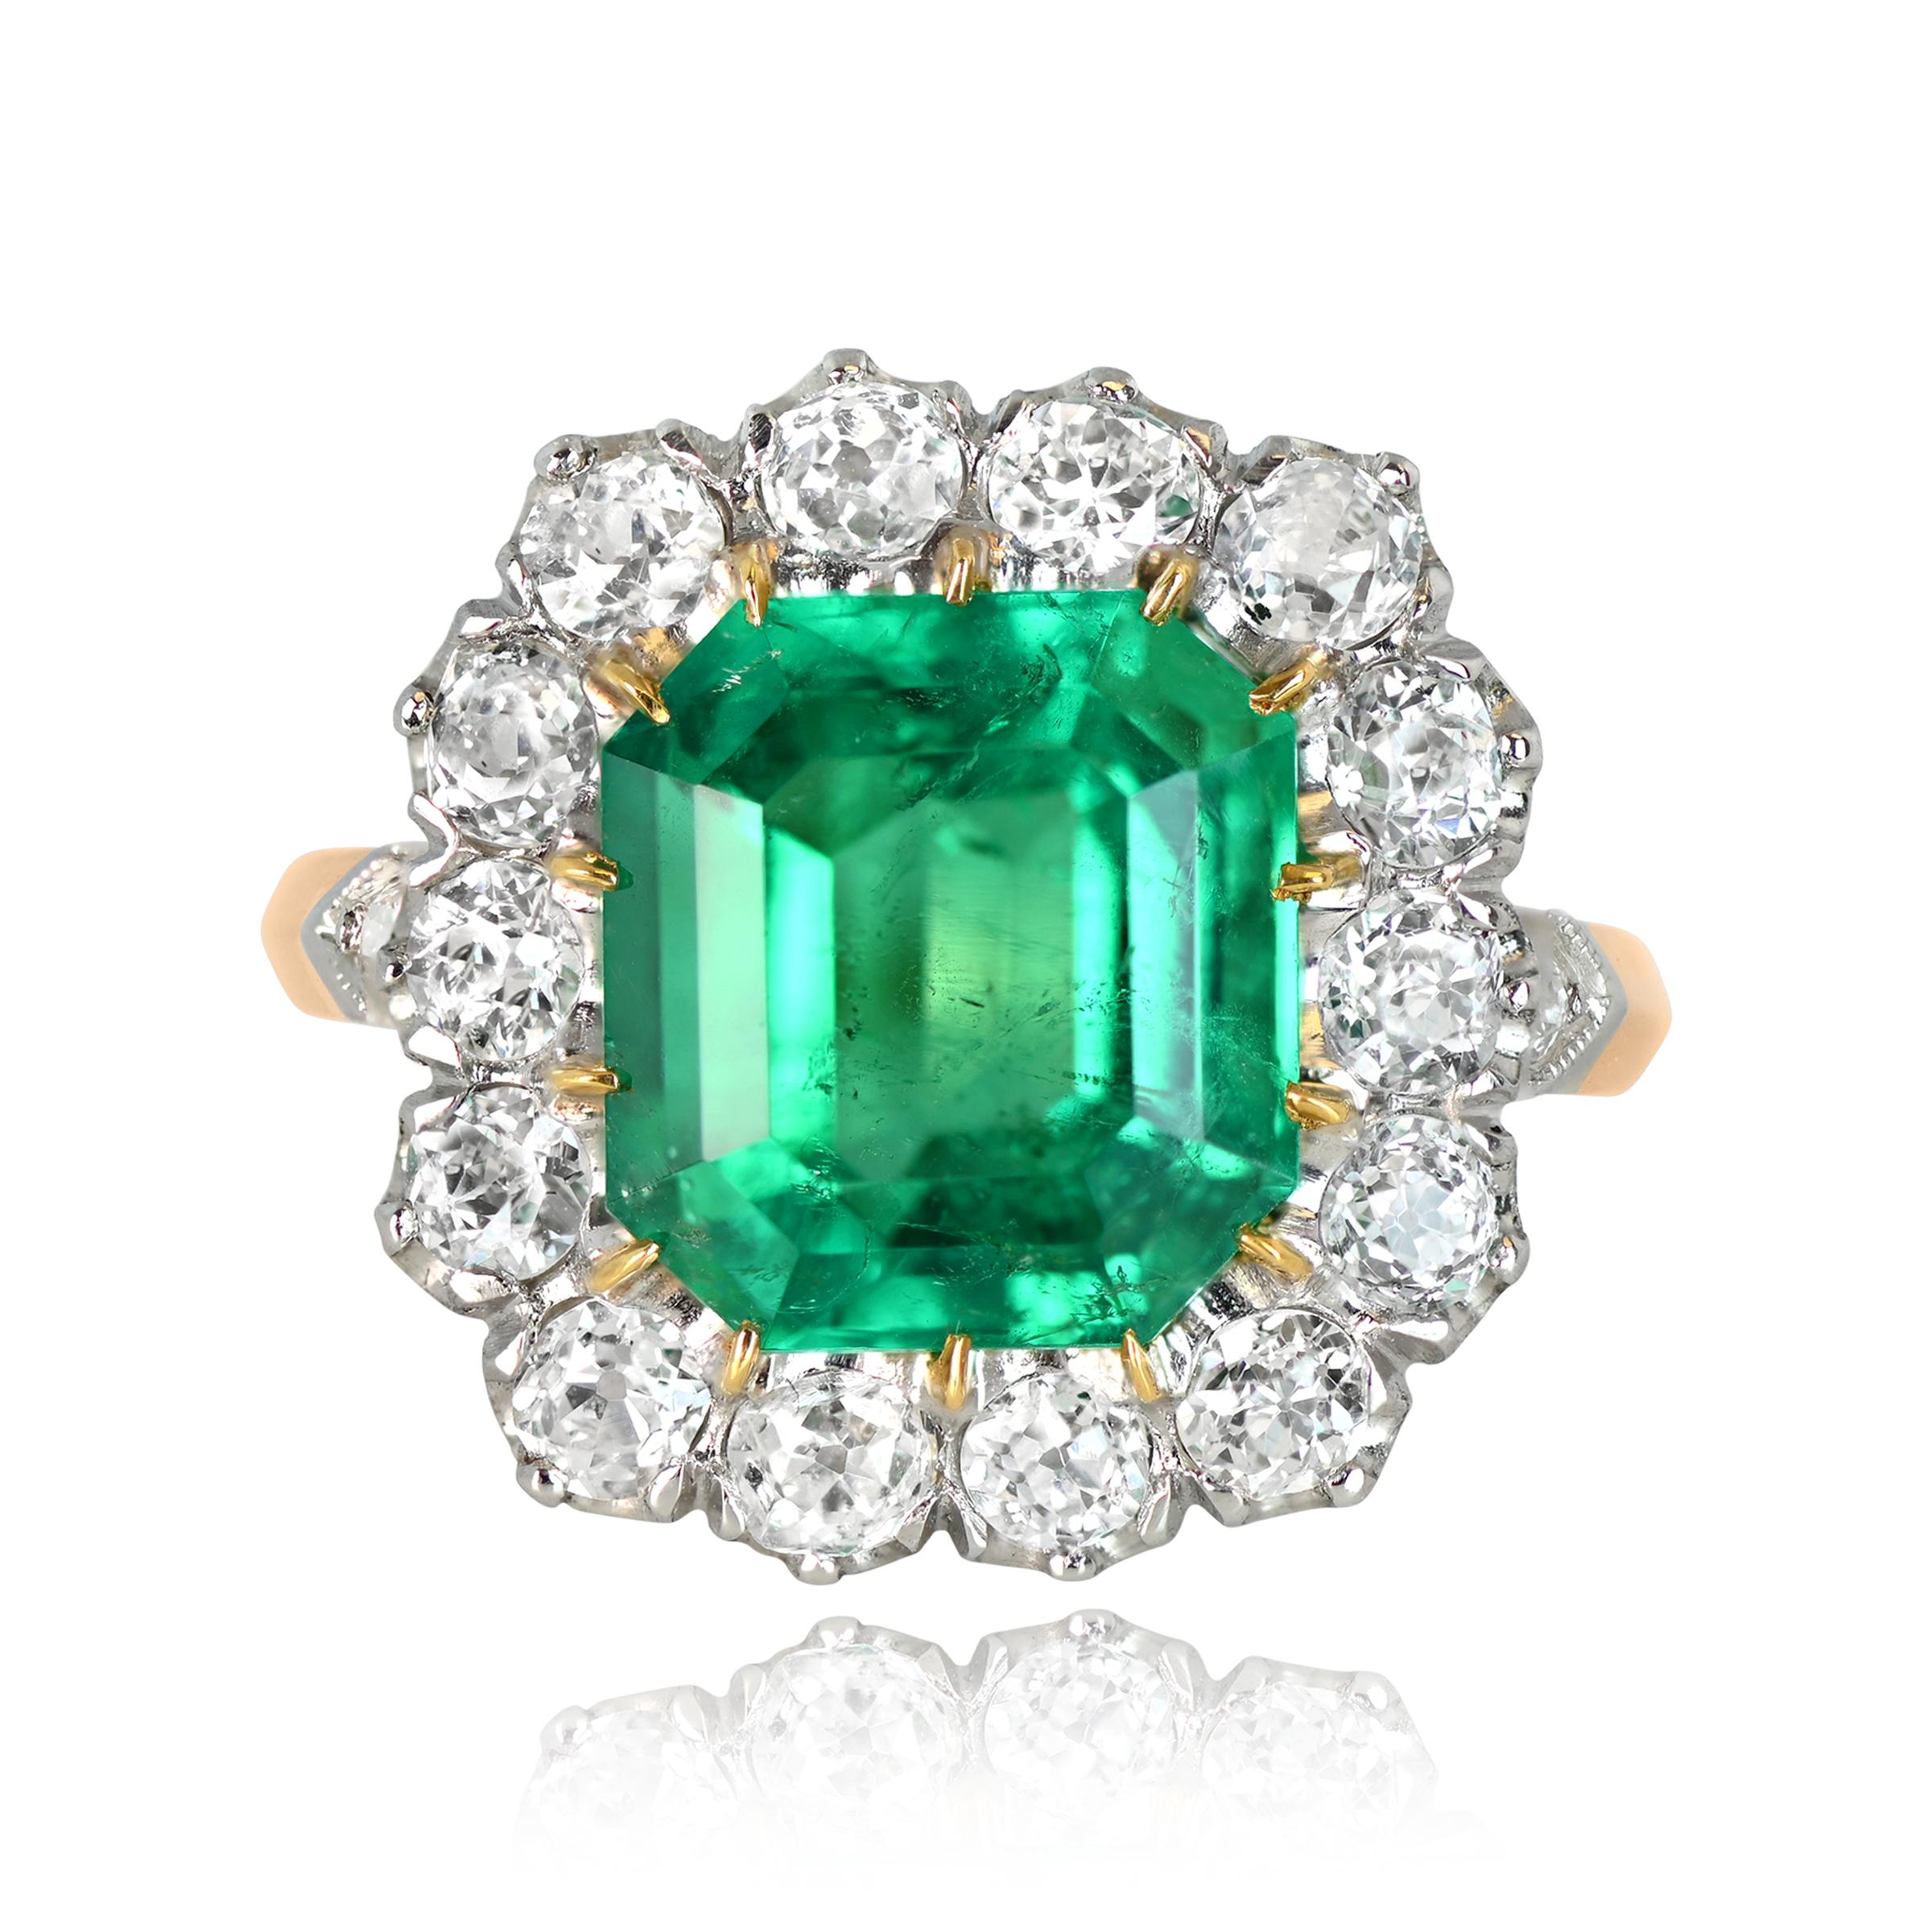 This is a stunning 4.55ct Colombian emerald cluster ring with old European cut diamonds. The emerald is GIA-certified. There is an additional halo of approx 1.50ct diamonds surrounding the center stone. This ring is handcrafted in platinum and 18k